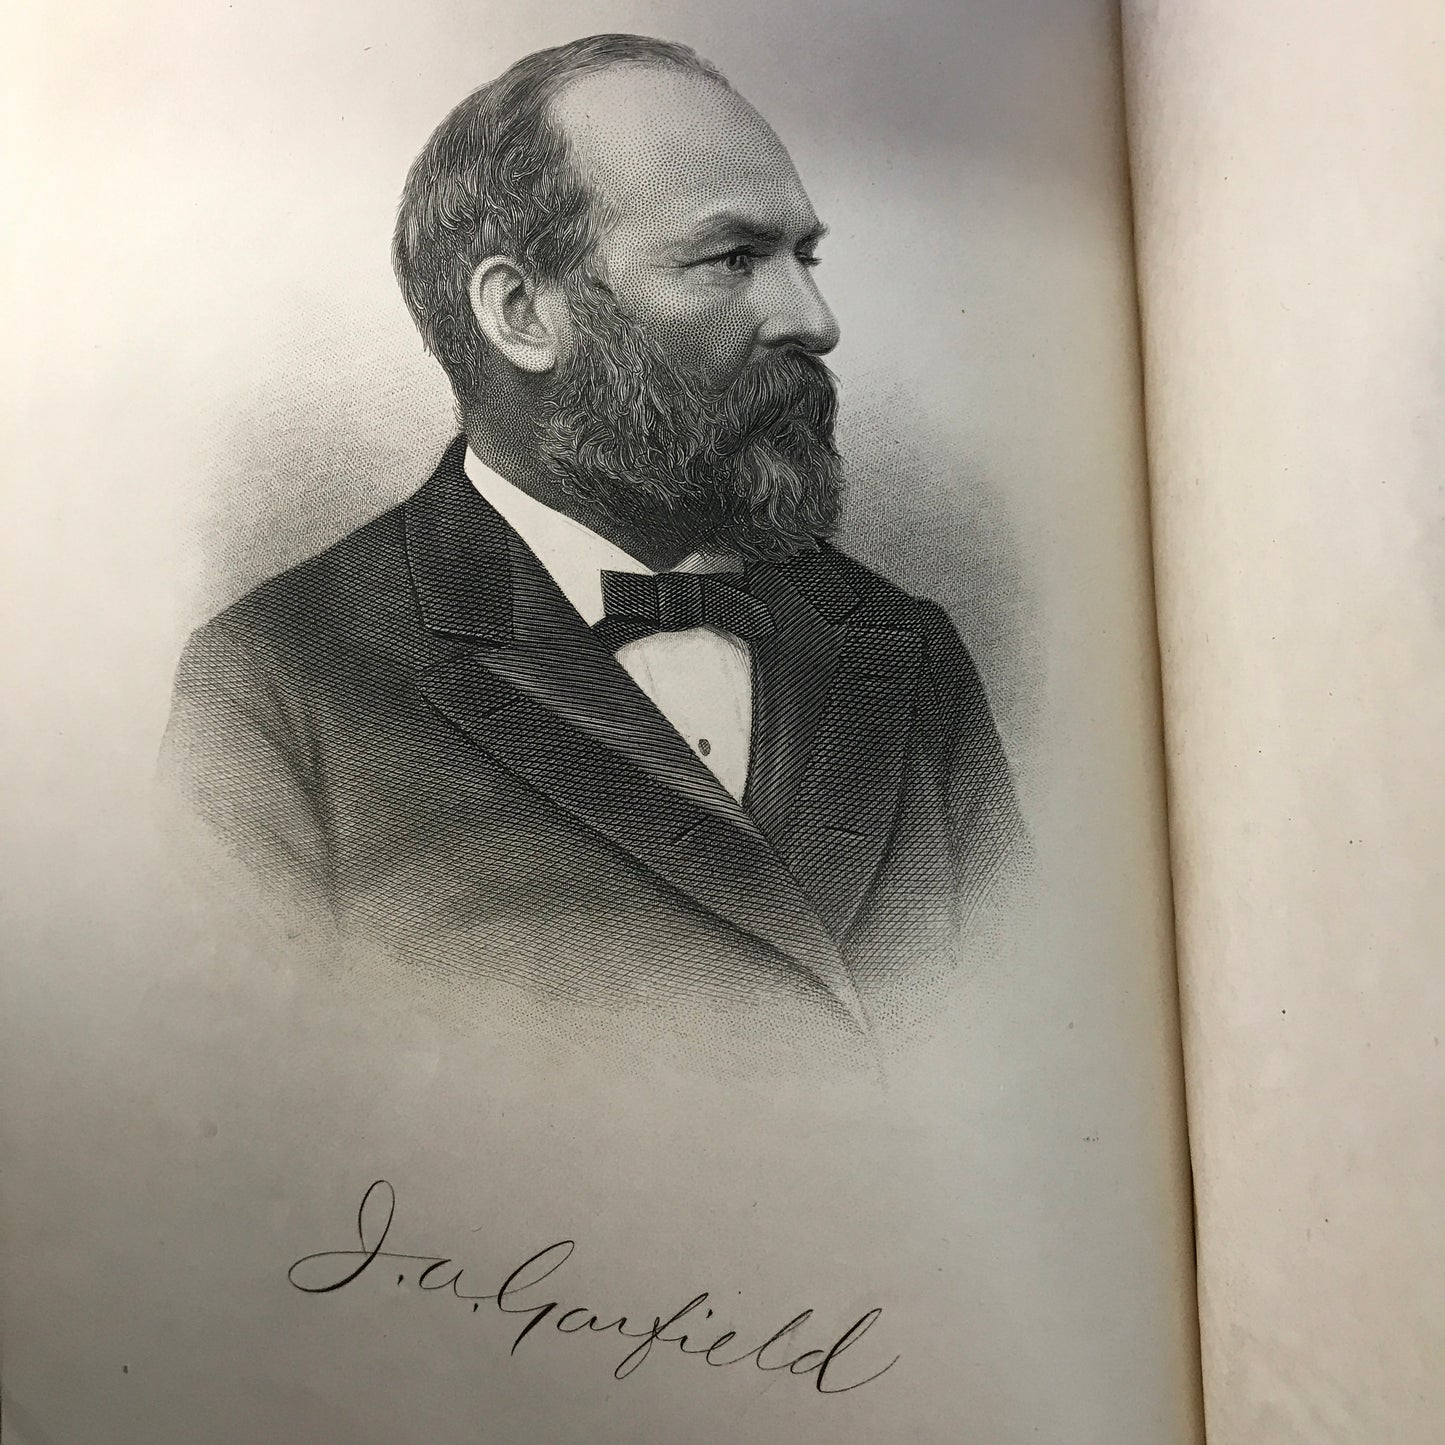 The Life and Work of James A. Garfield